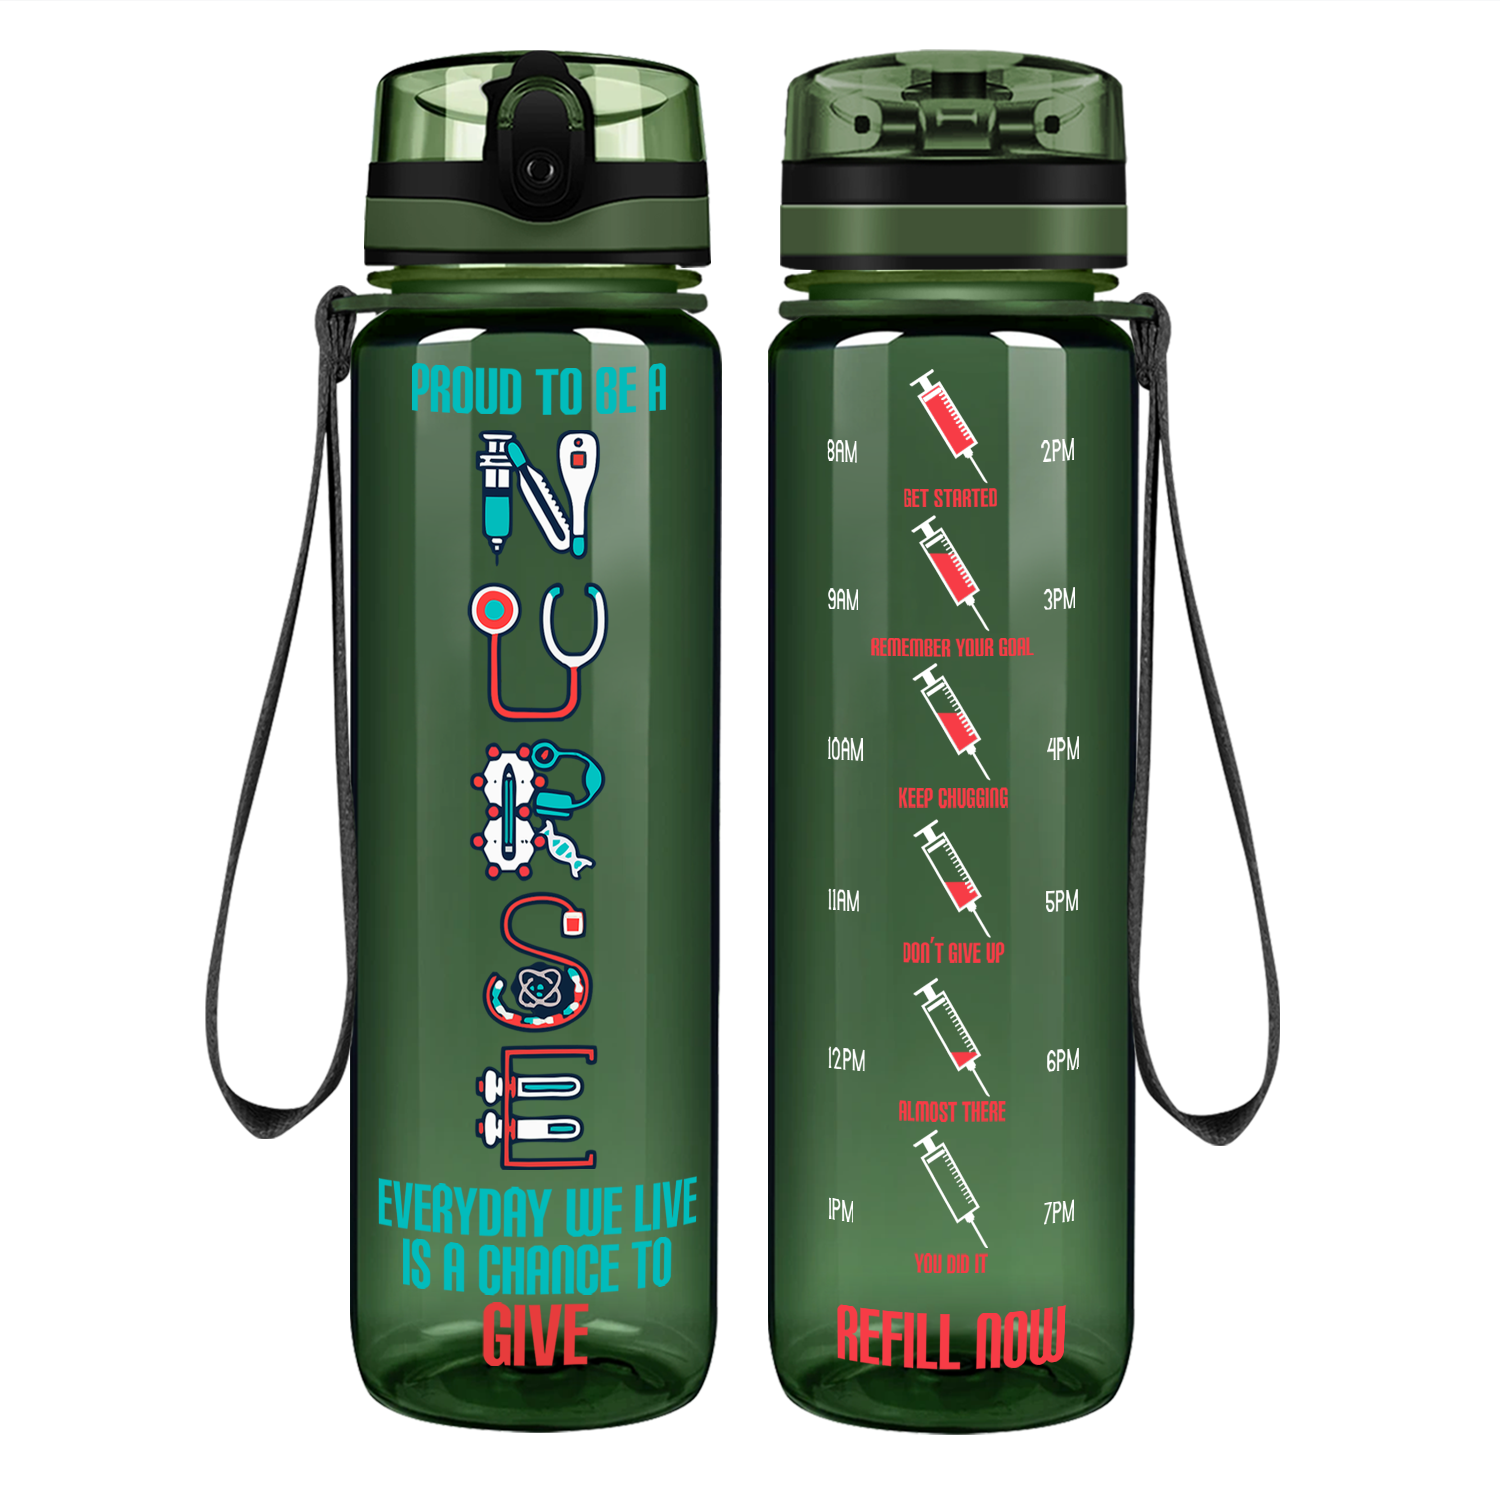 Proud to be a Nurse on 32oz Motivational Tracking Water Bottle